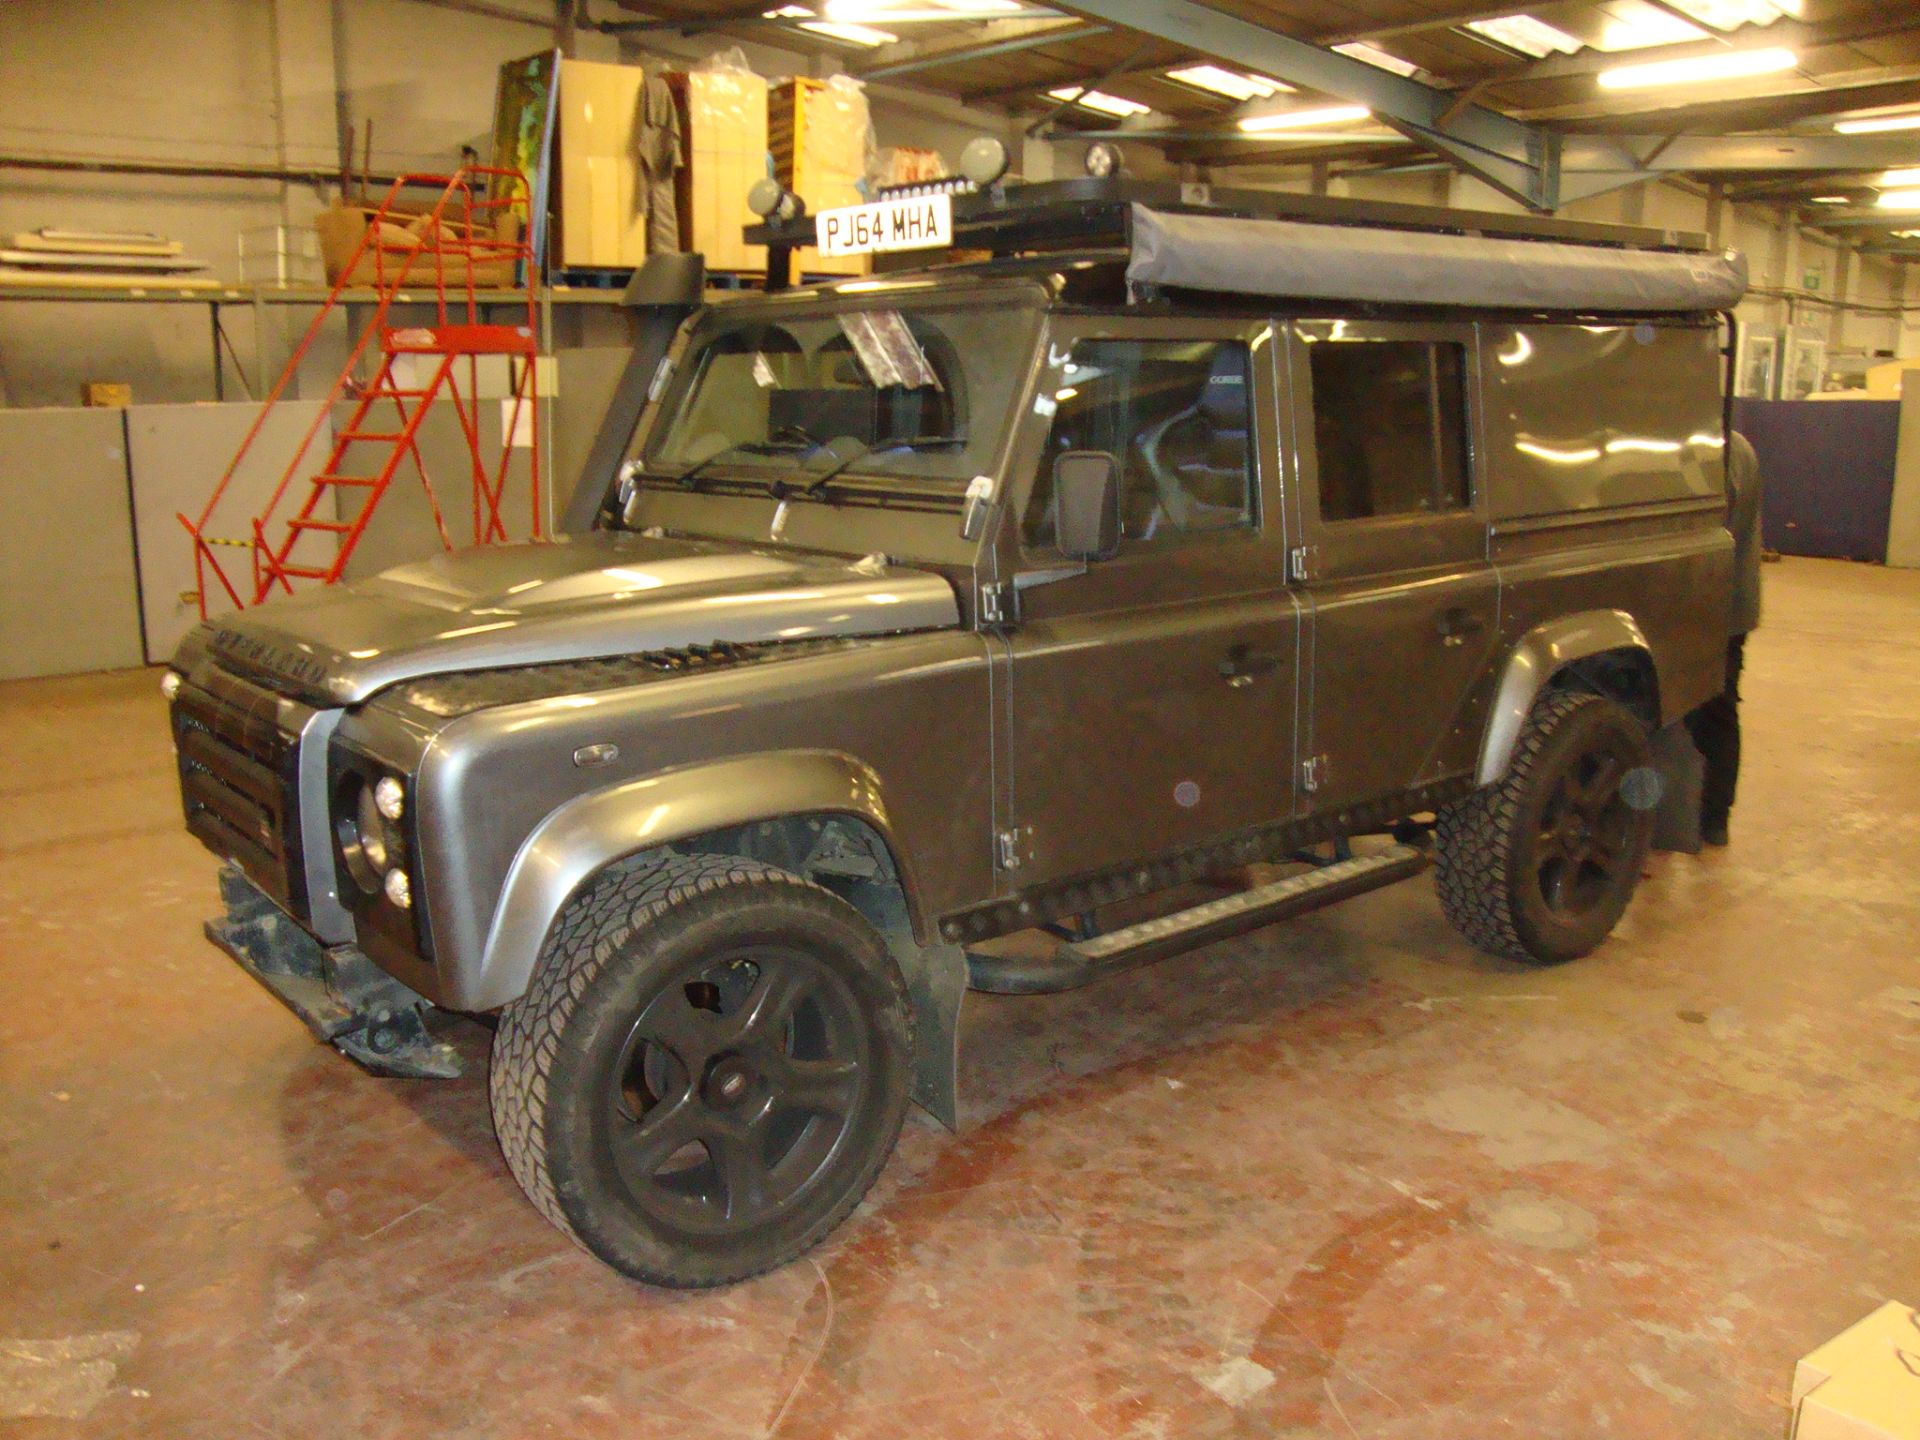 2014 Land Rover Defender 110 XS 2.2 TDCi Utility Wagon SMC Over Land Flat Dog Special - Image 10 of 37